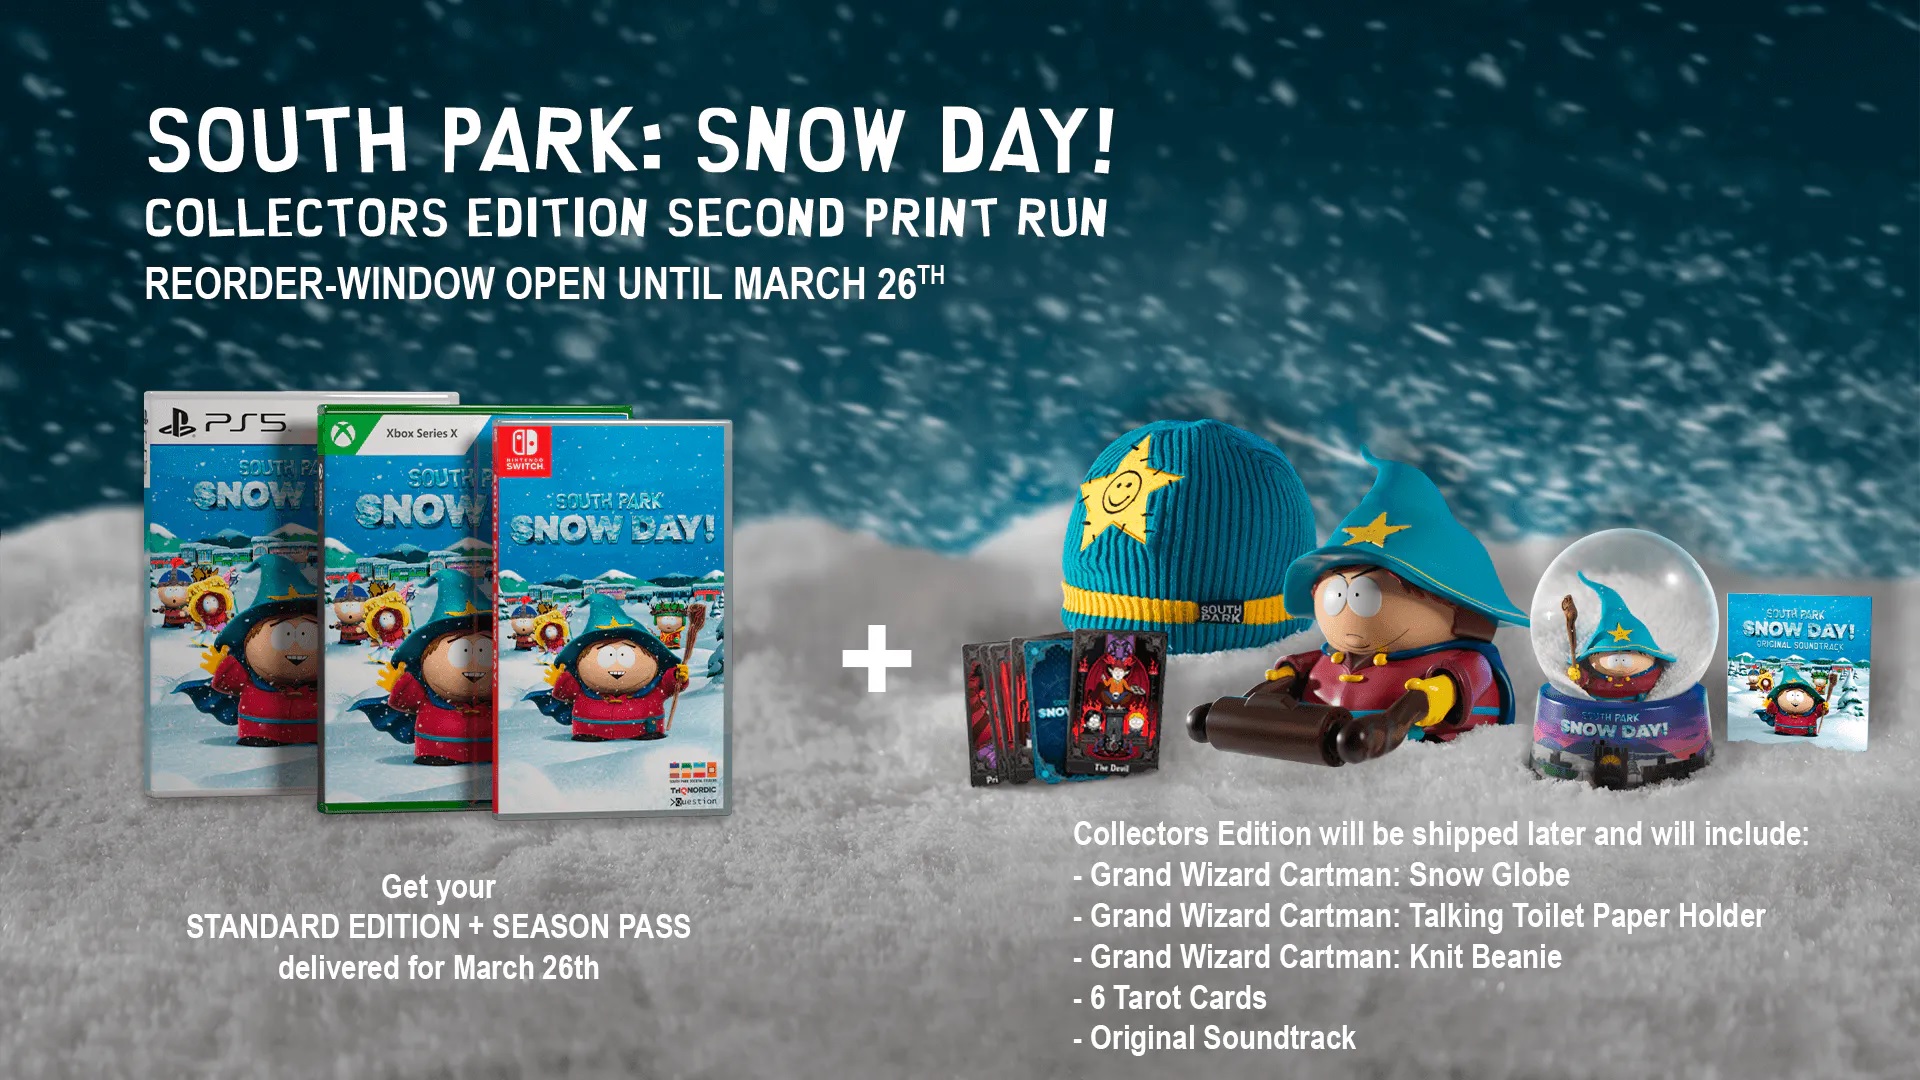 All collectors edition items for South Park Snow Day